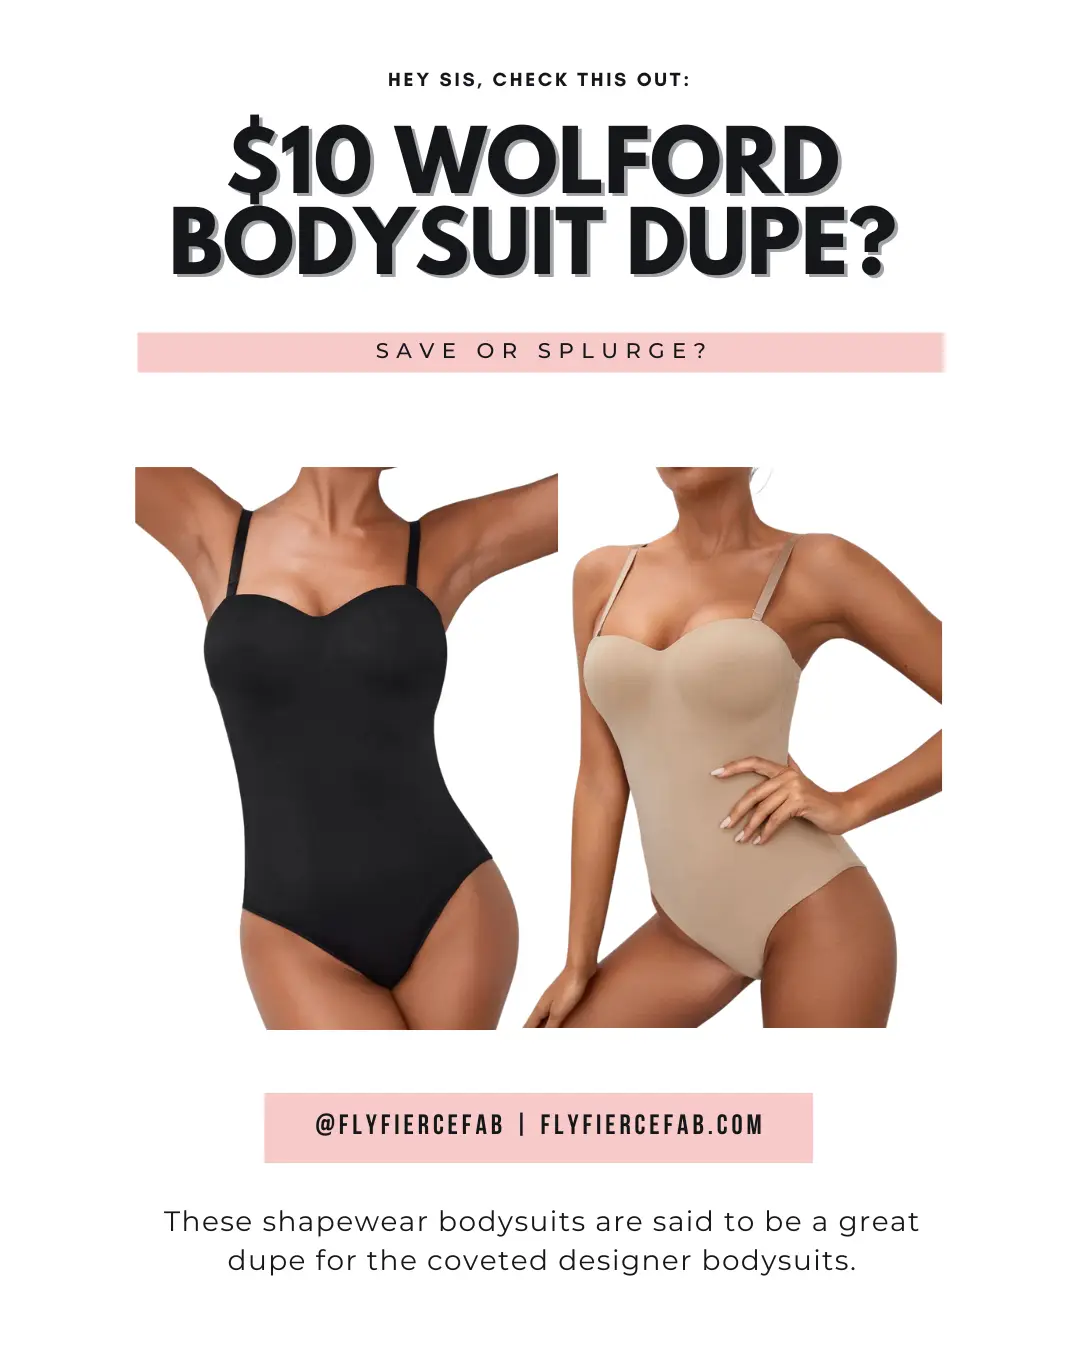 Another Wolford Dupe For Curvy Girls (pt. 3), But Even Cheaper